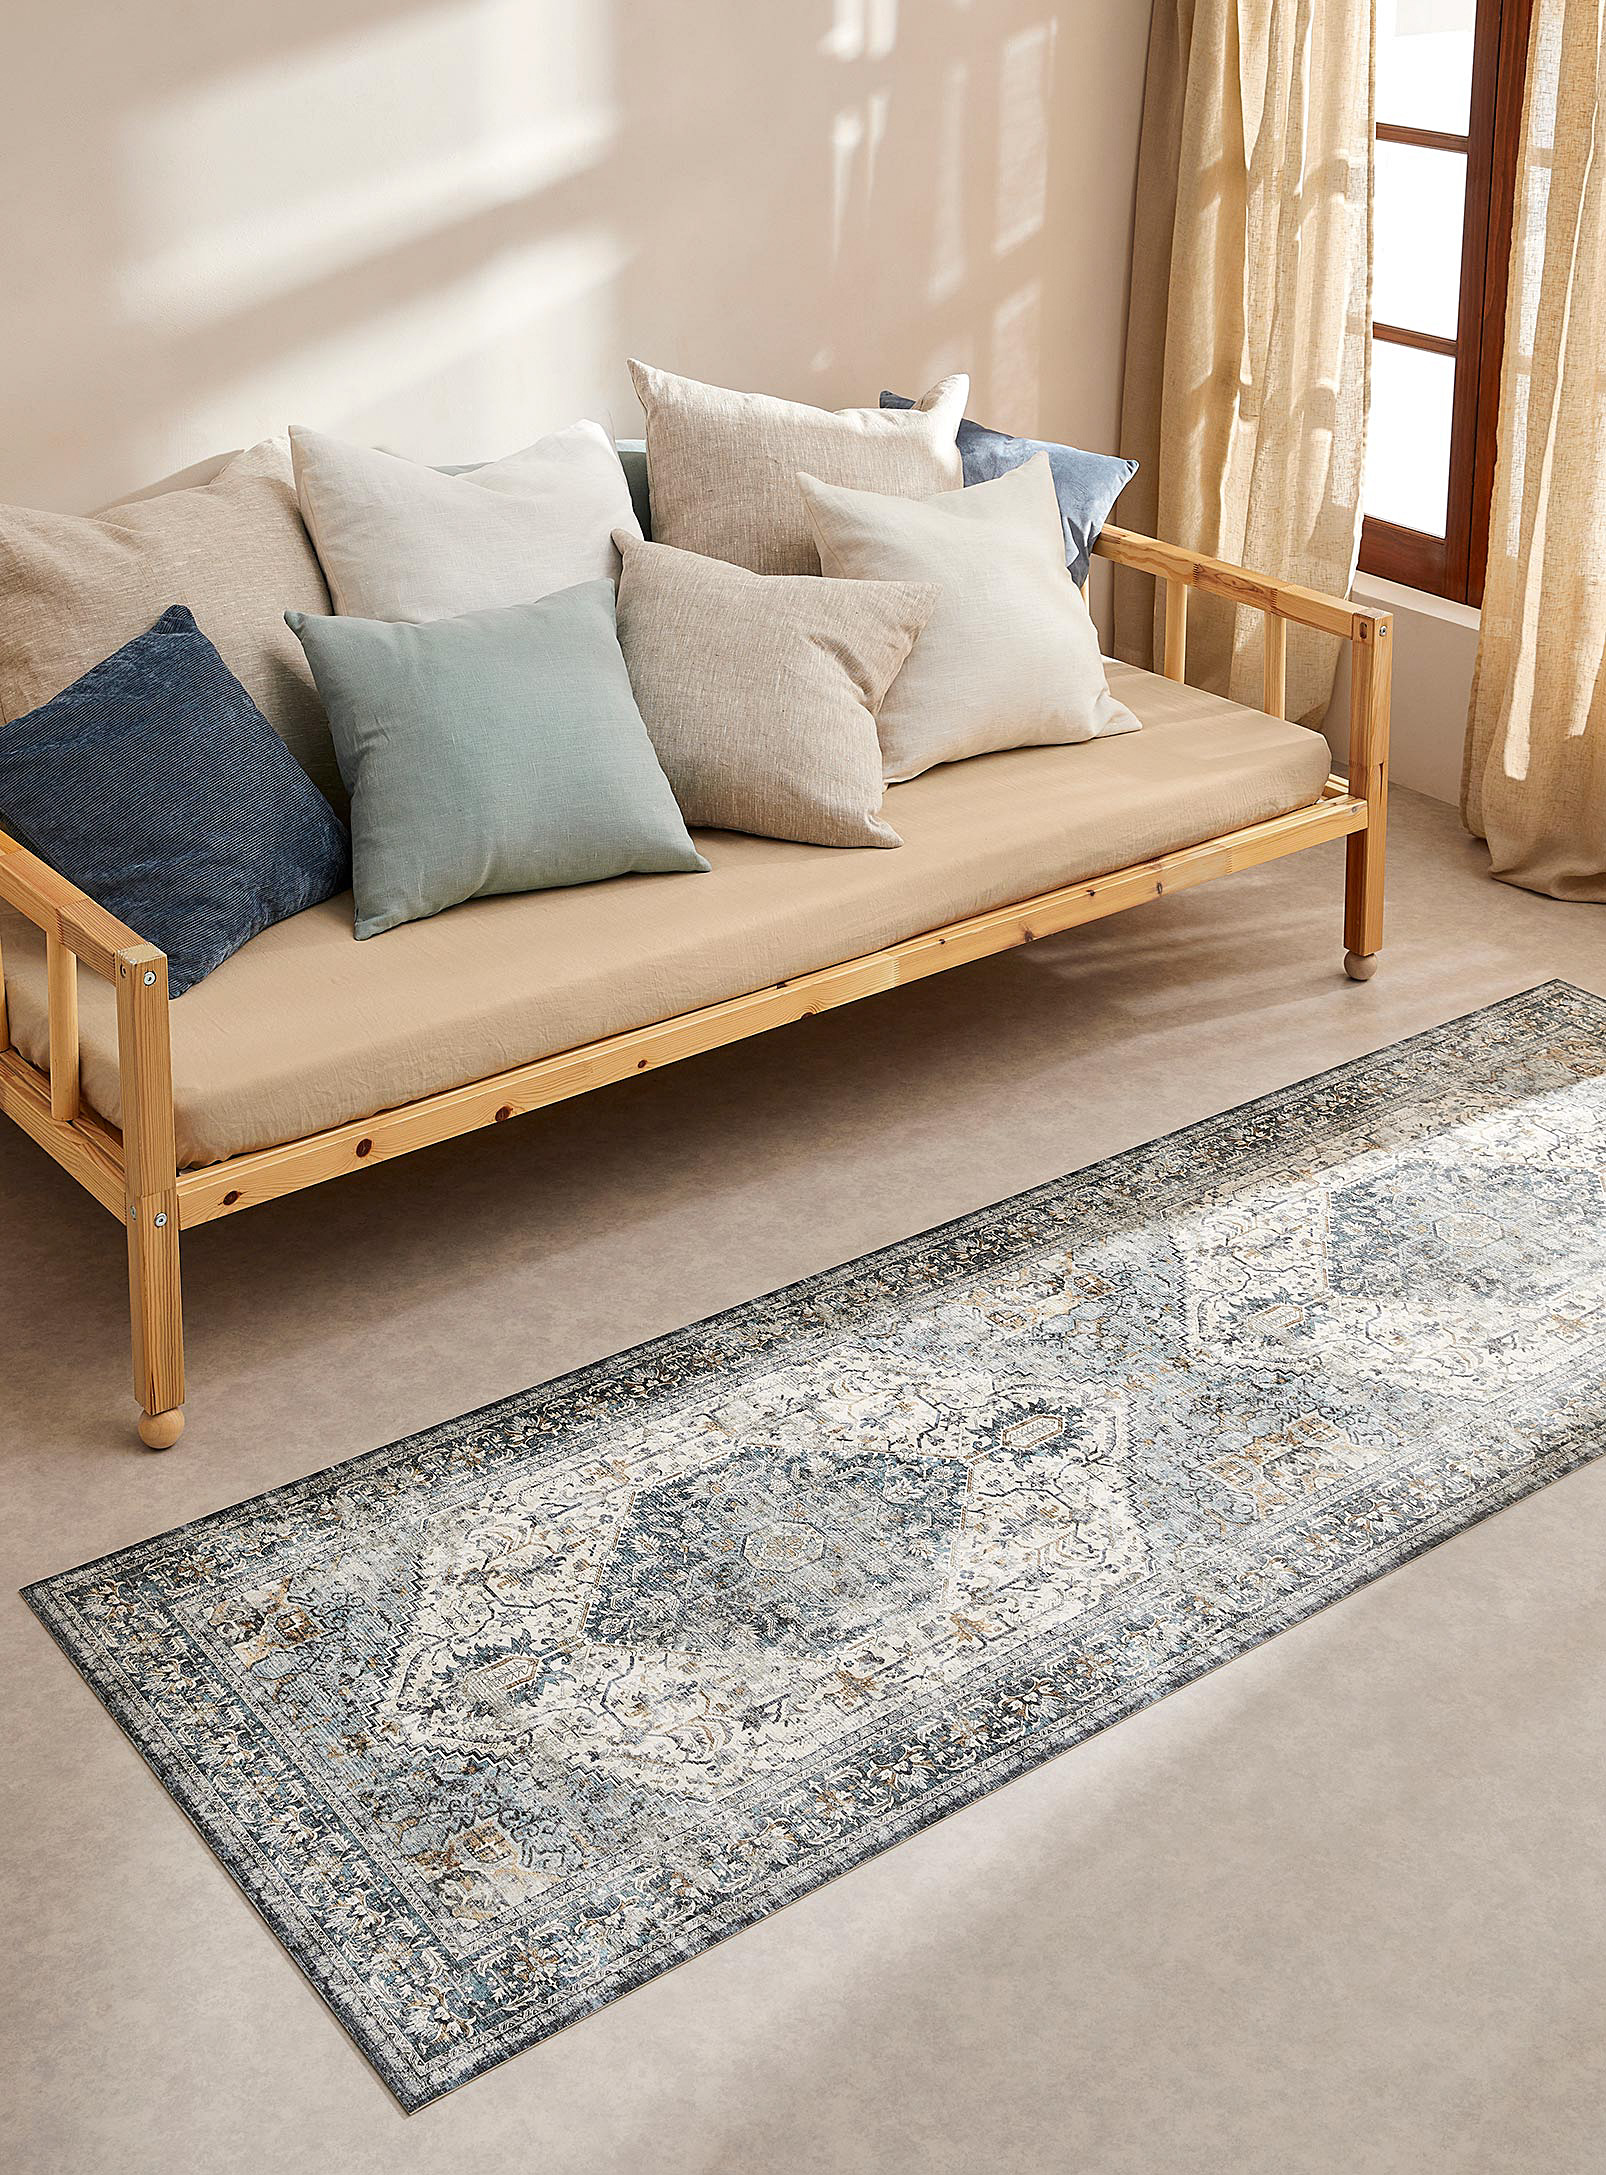 Adama Antique Medallion Vinyl Rug See Available Sizes In Patterned Blue